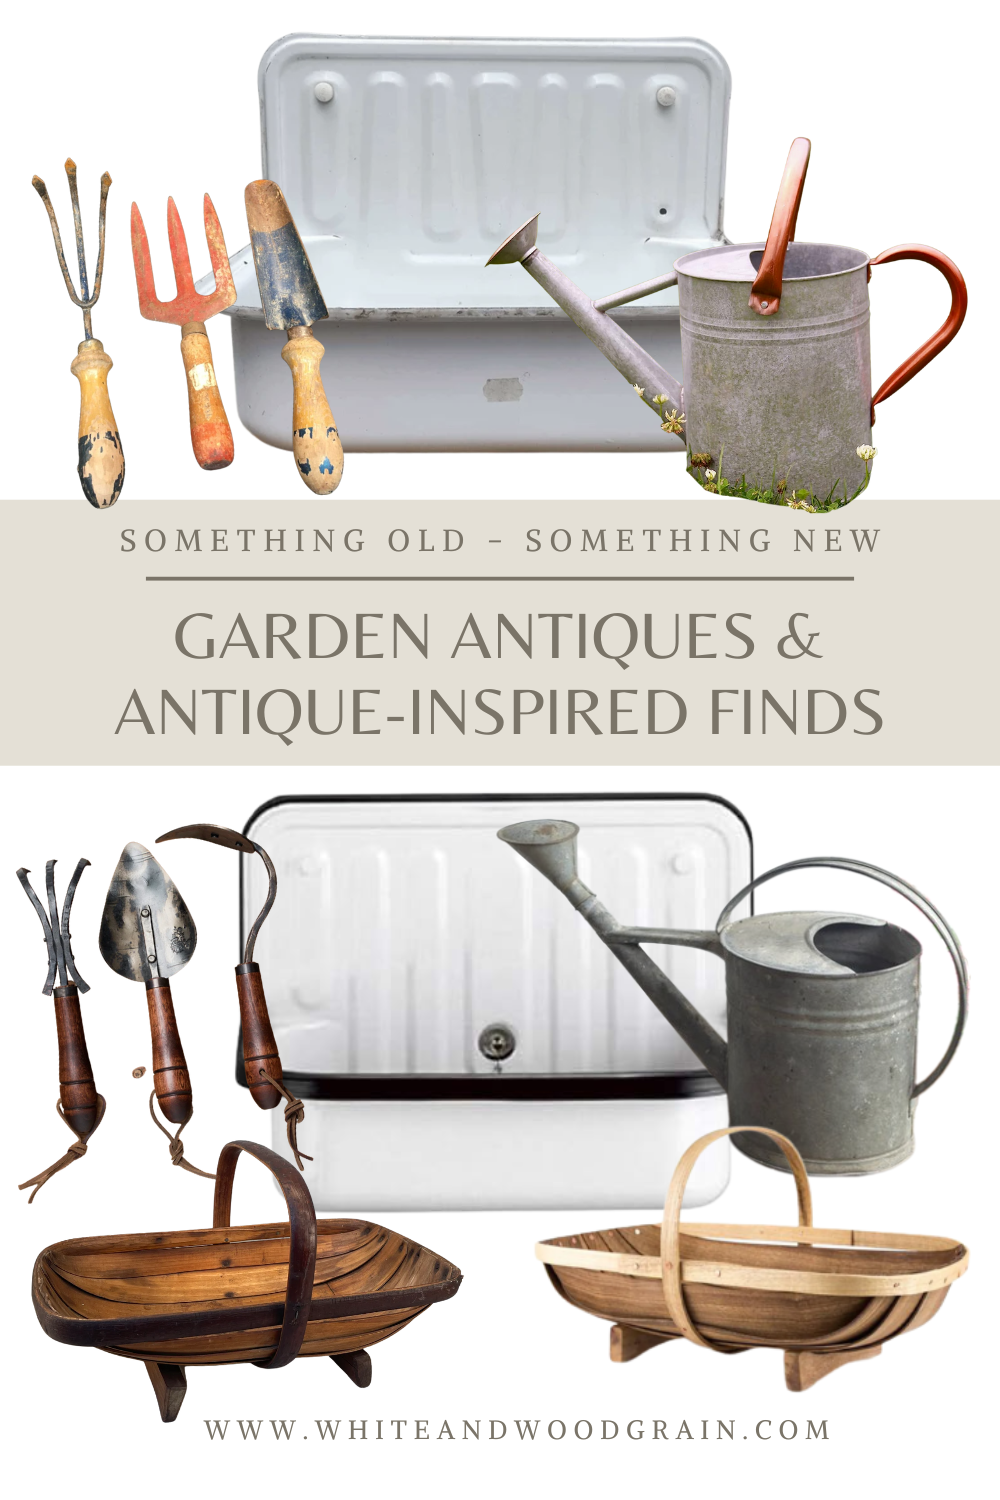 garden antiques and antique inspired gardening finds including galvanized watering cans, hand tools, enamel sink planters, and flower trugs